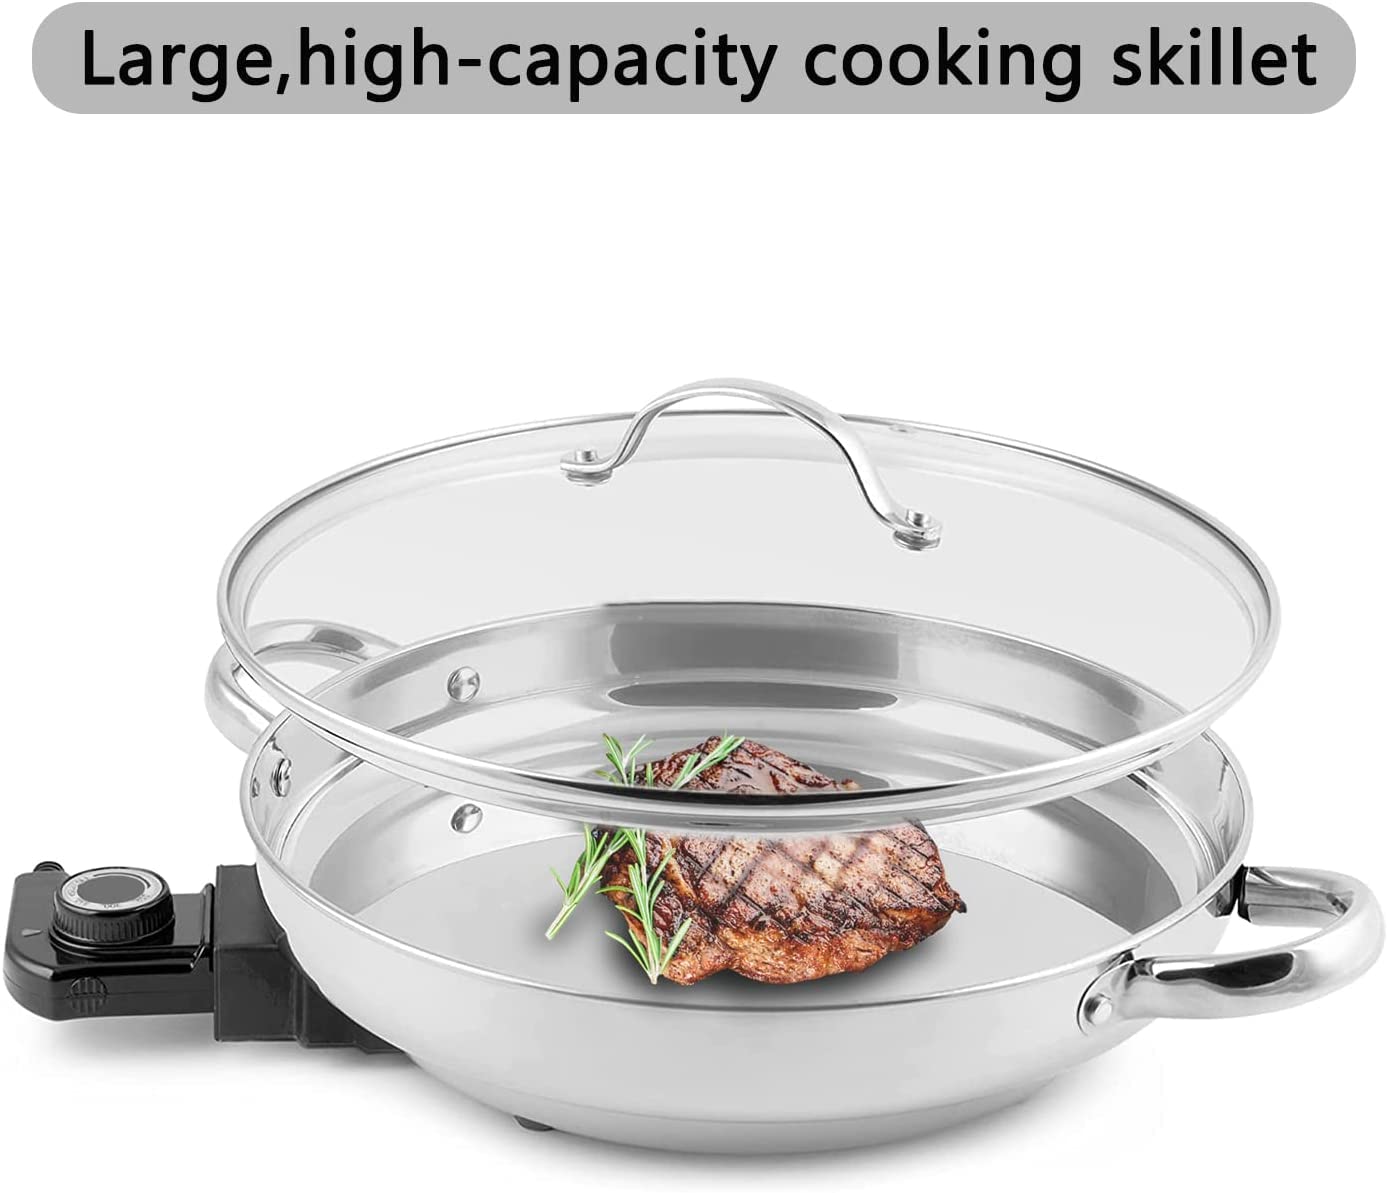 11.8-Inch Capacity Electric Skillet - for Simmer Fry Bake Steam (Silver)